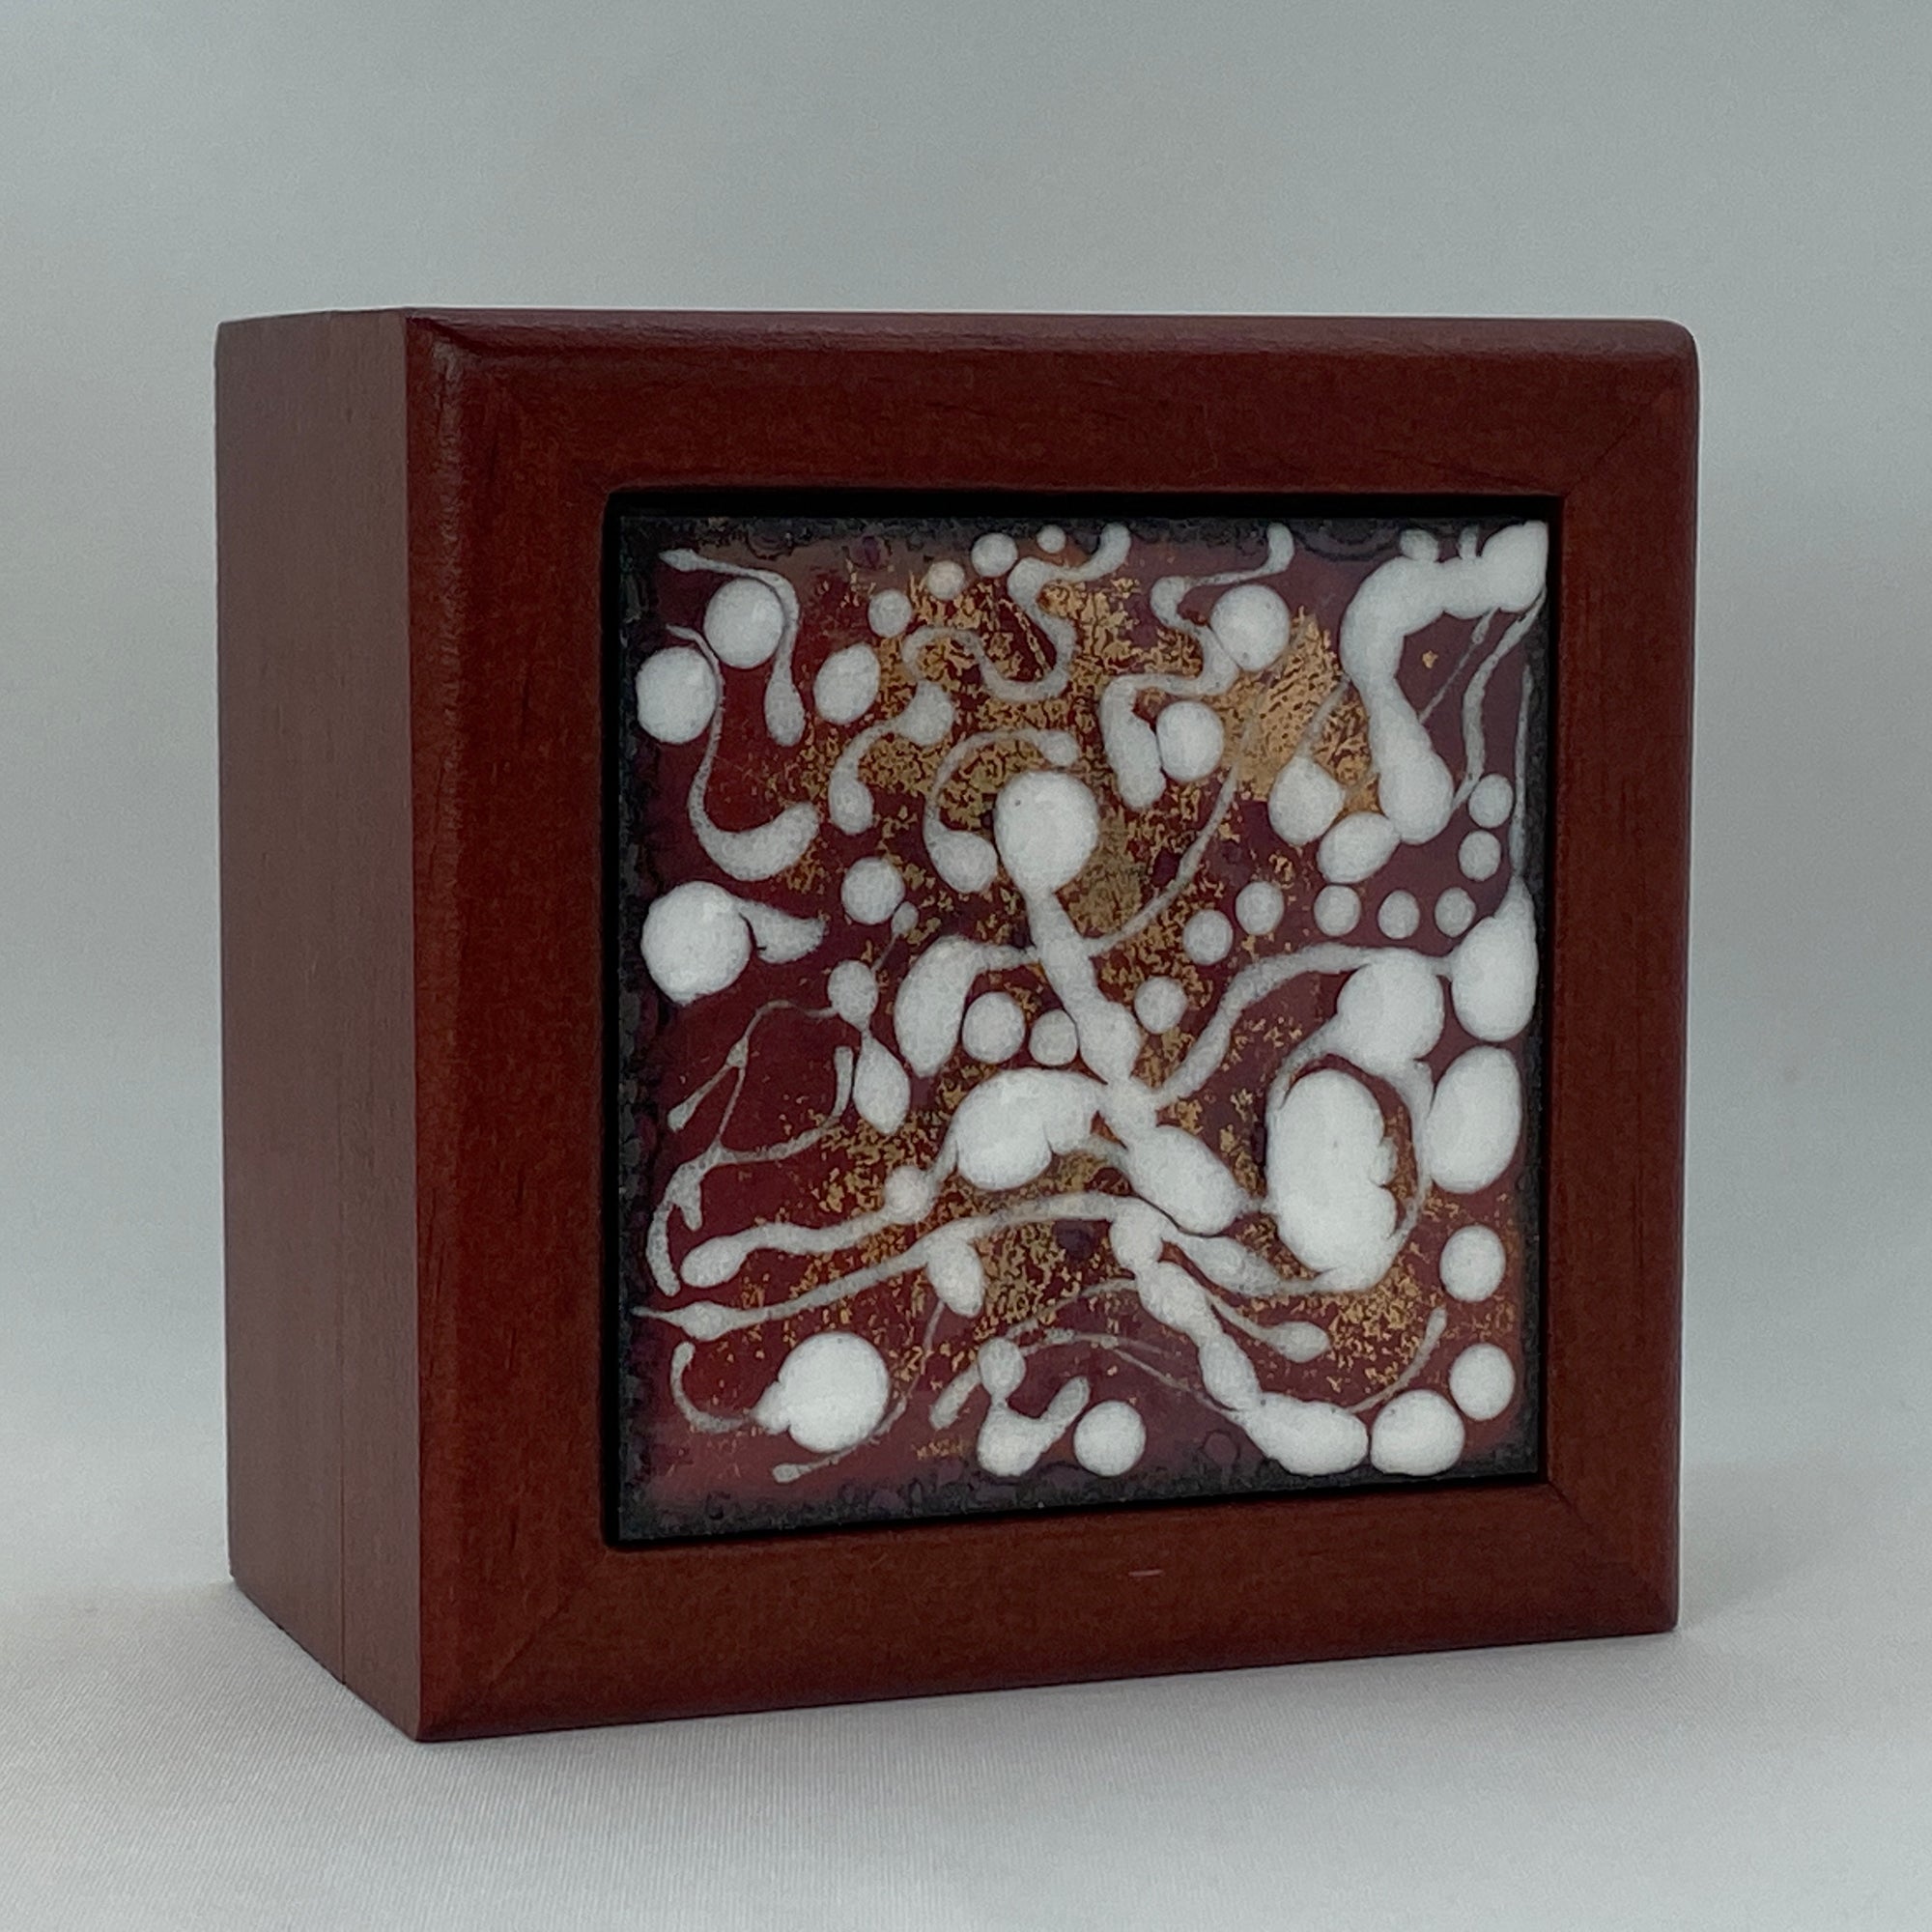 Camille Patton Hear the Music Vitreous Enamel Inlay in lid of wooden box